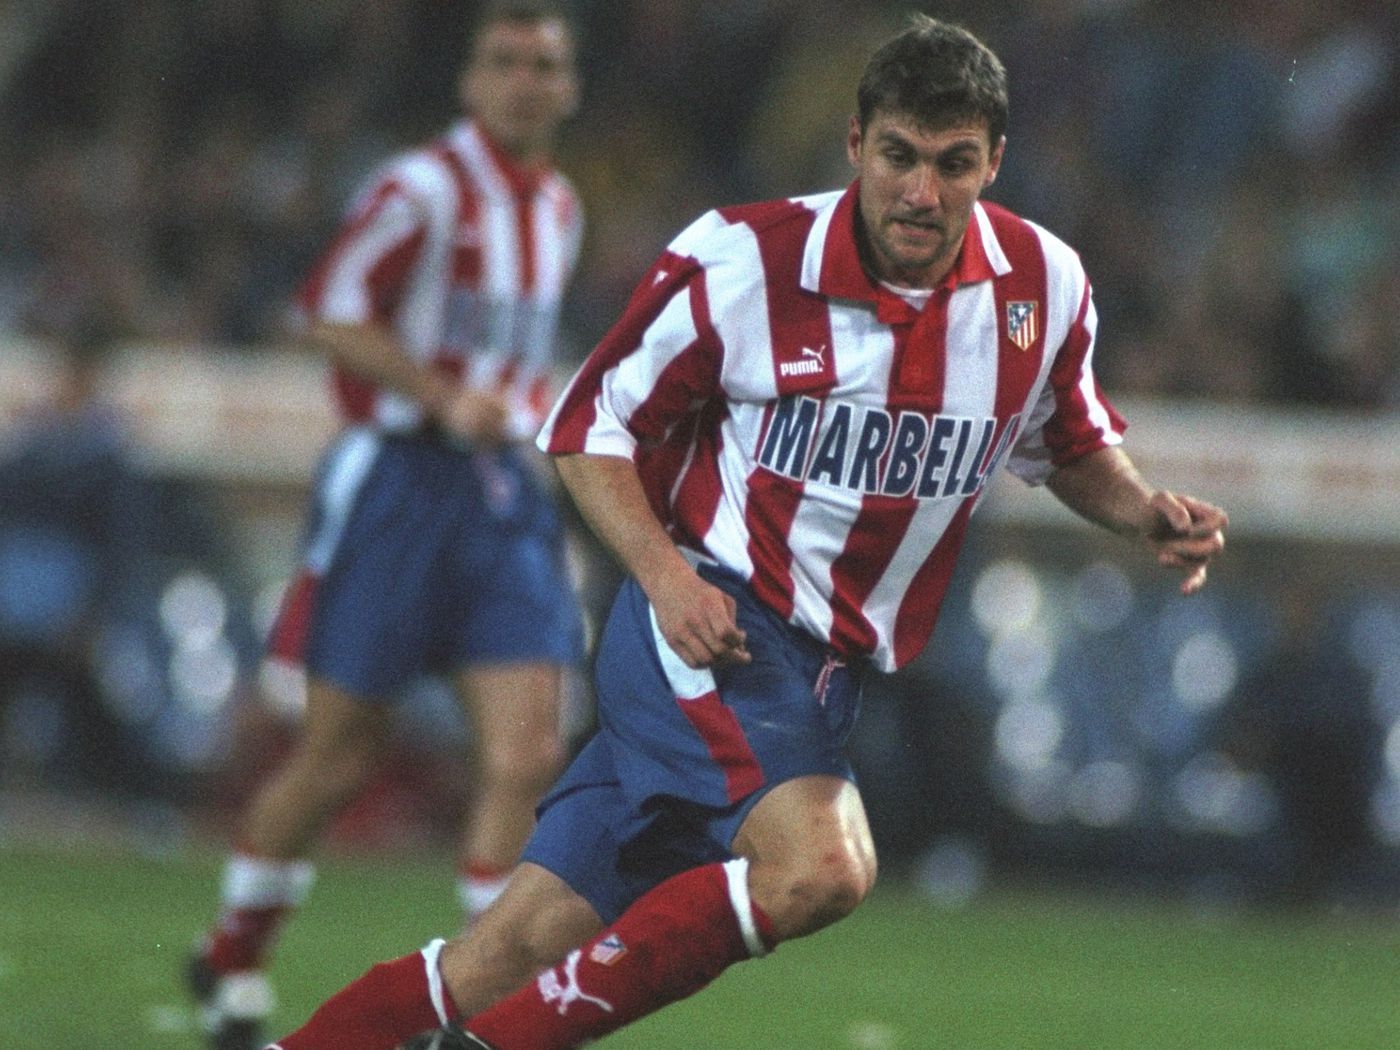 Looking back: Christian Vieri's whirlwind year with Atlético Madrid the Calderon